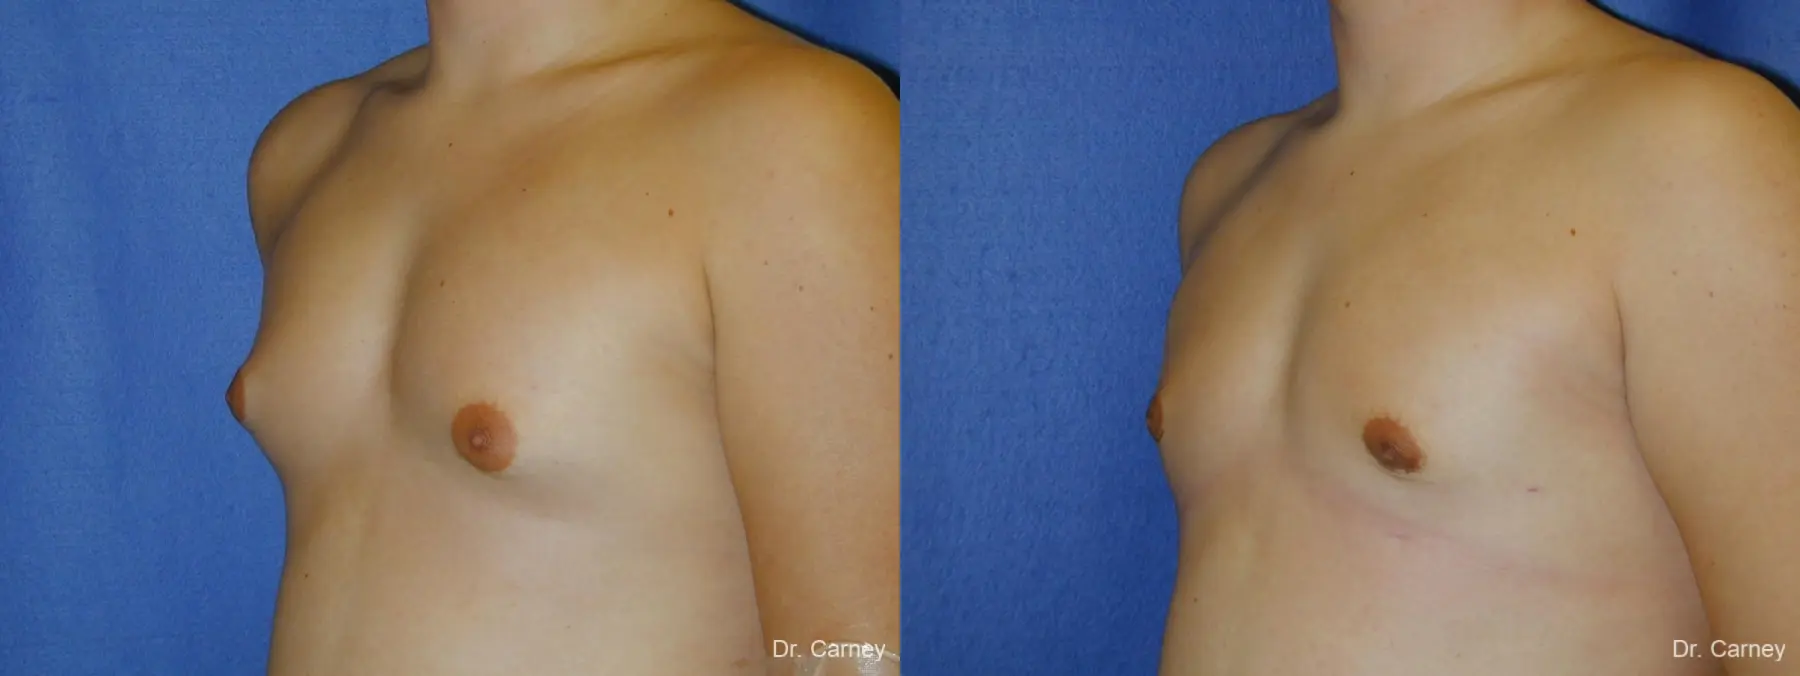 Virginia Beach Gynecomastia - Before and After 3